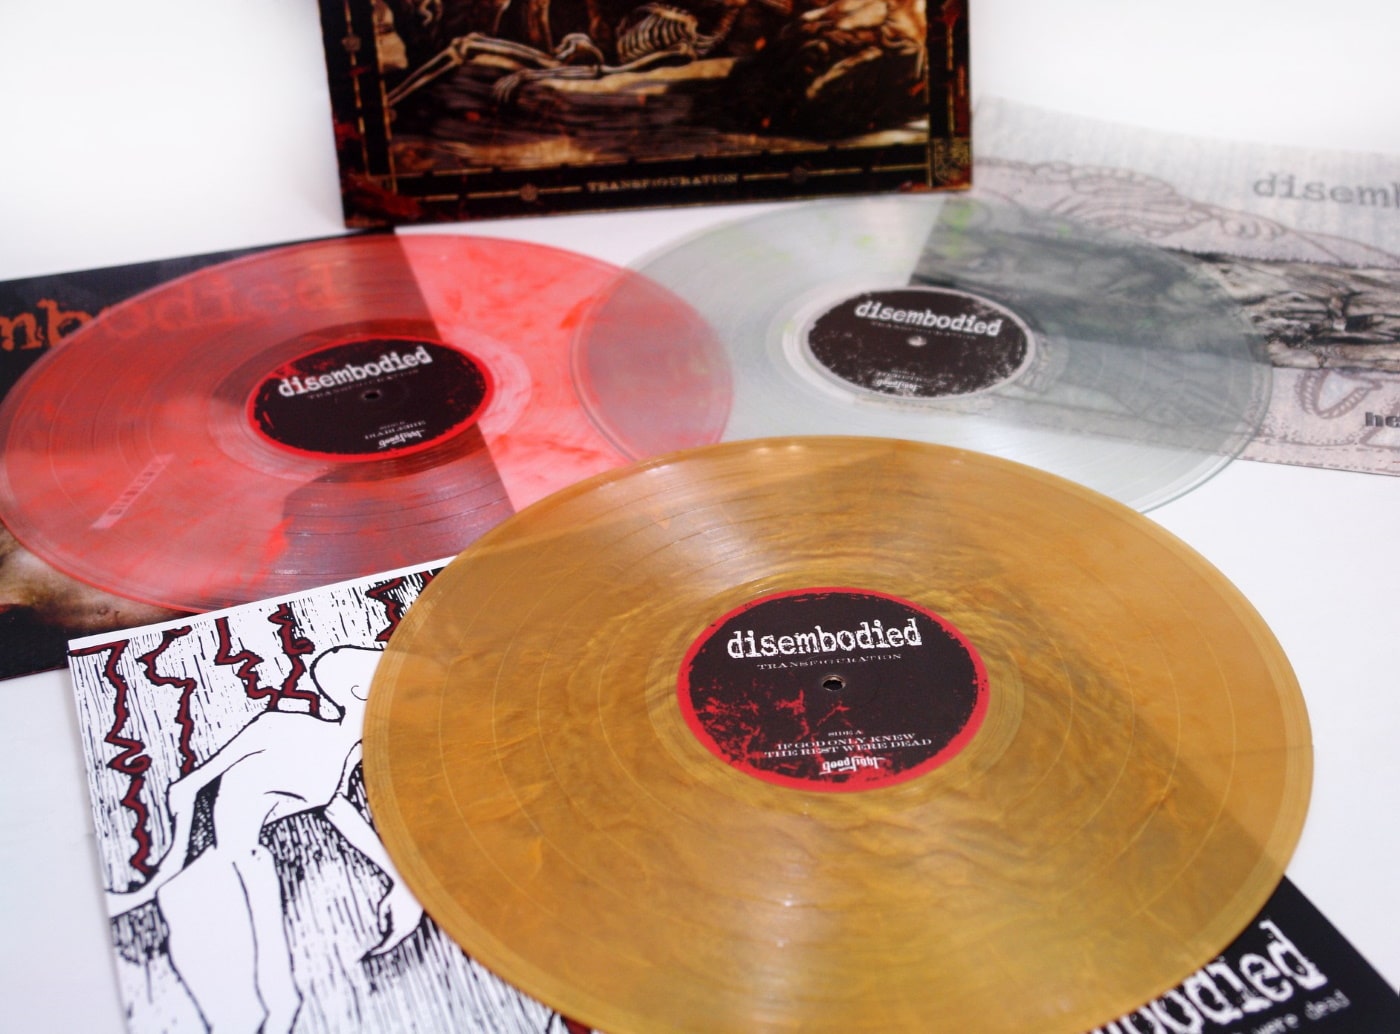 DISEMBODIED new collection of vinyls